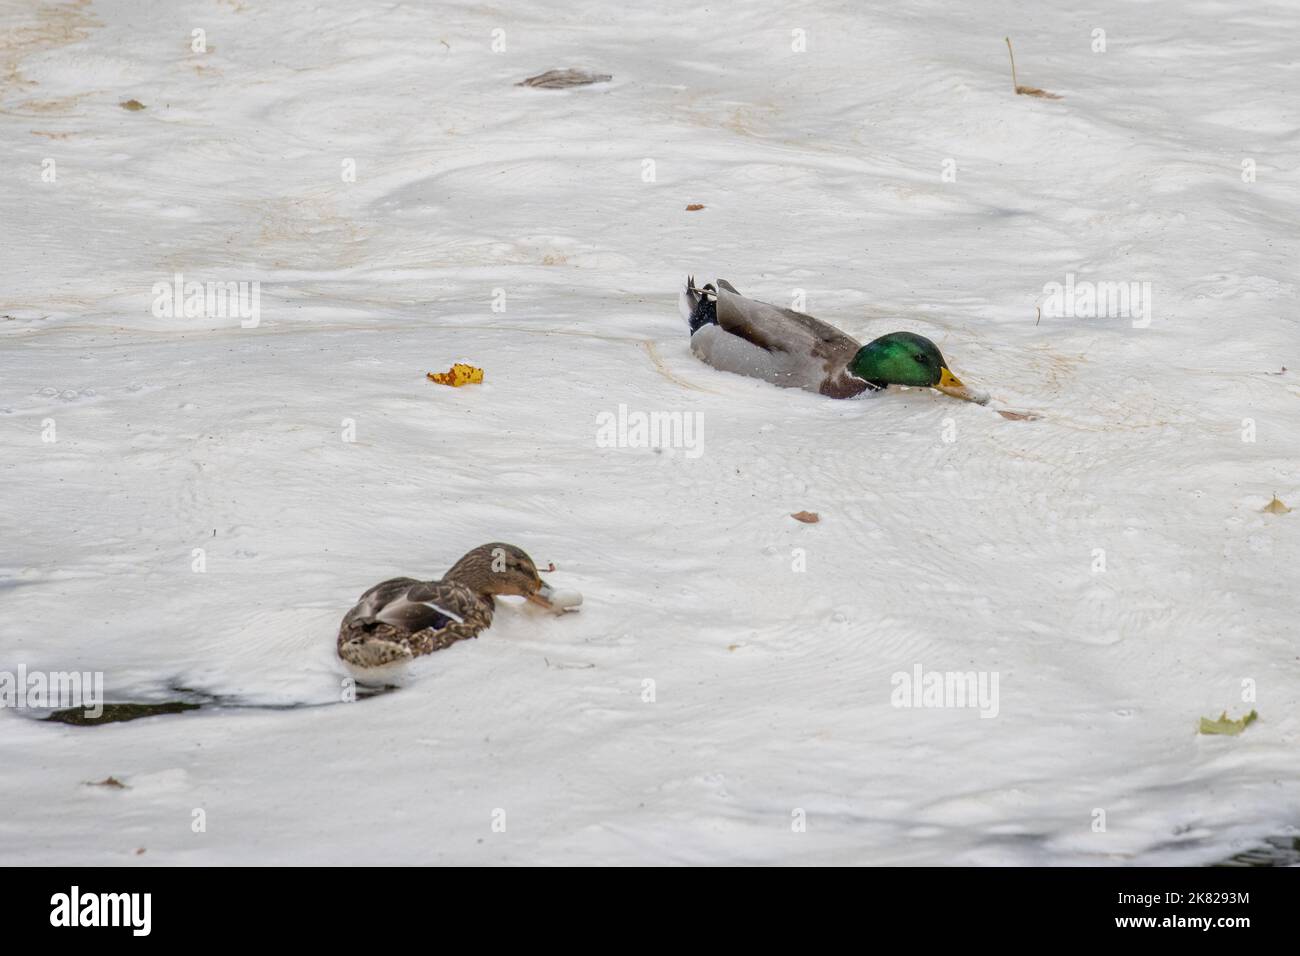 Male mallard duck (Anas platyrhynchos) swimming through and feeding in naturally occurring river foam caused by dissolved organic matter acting as a s Stock Photo